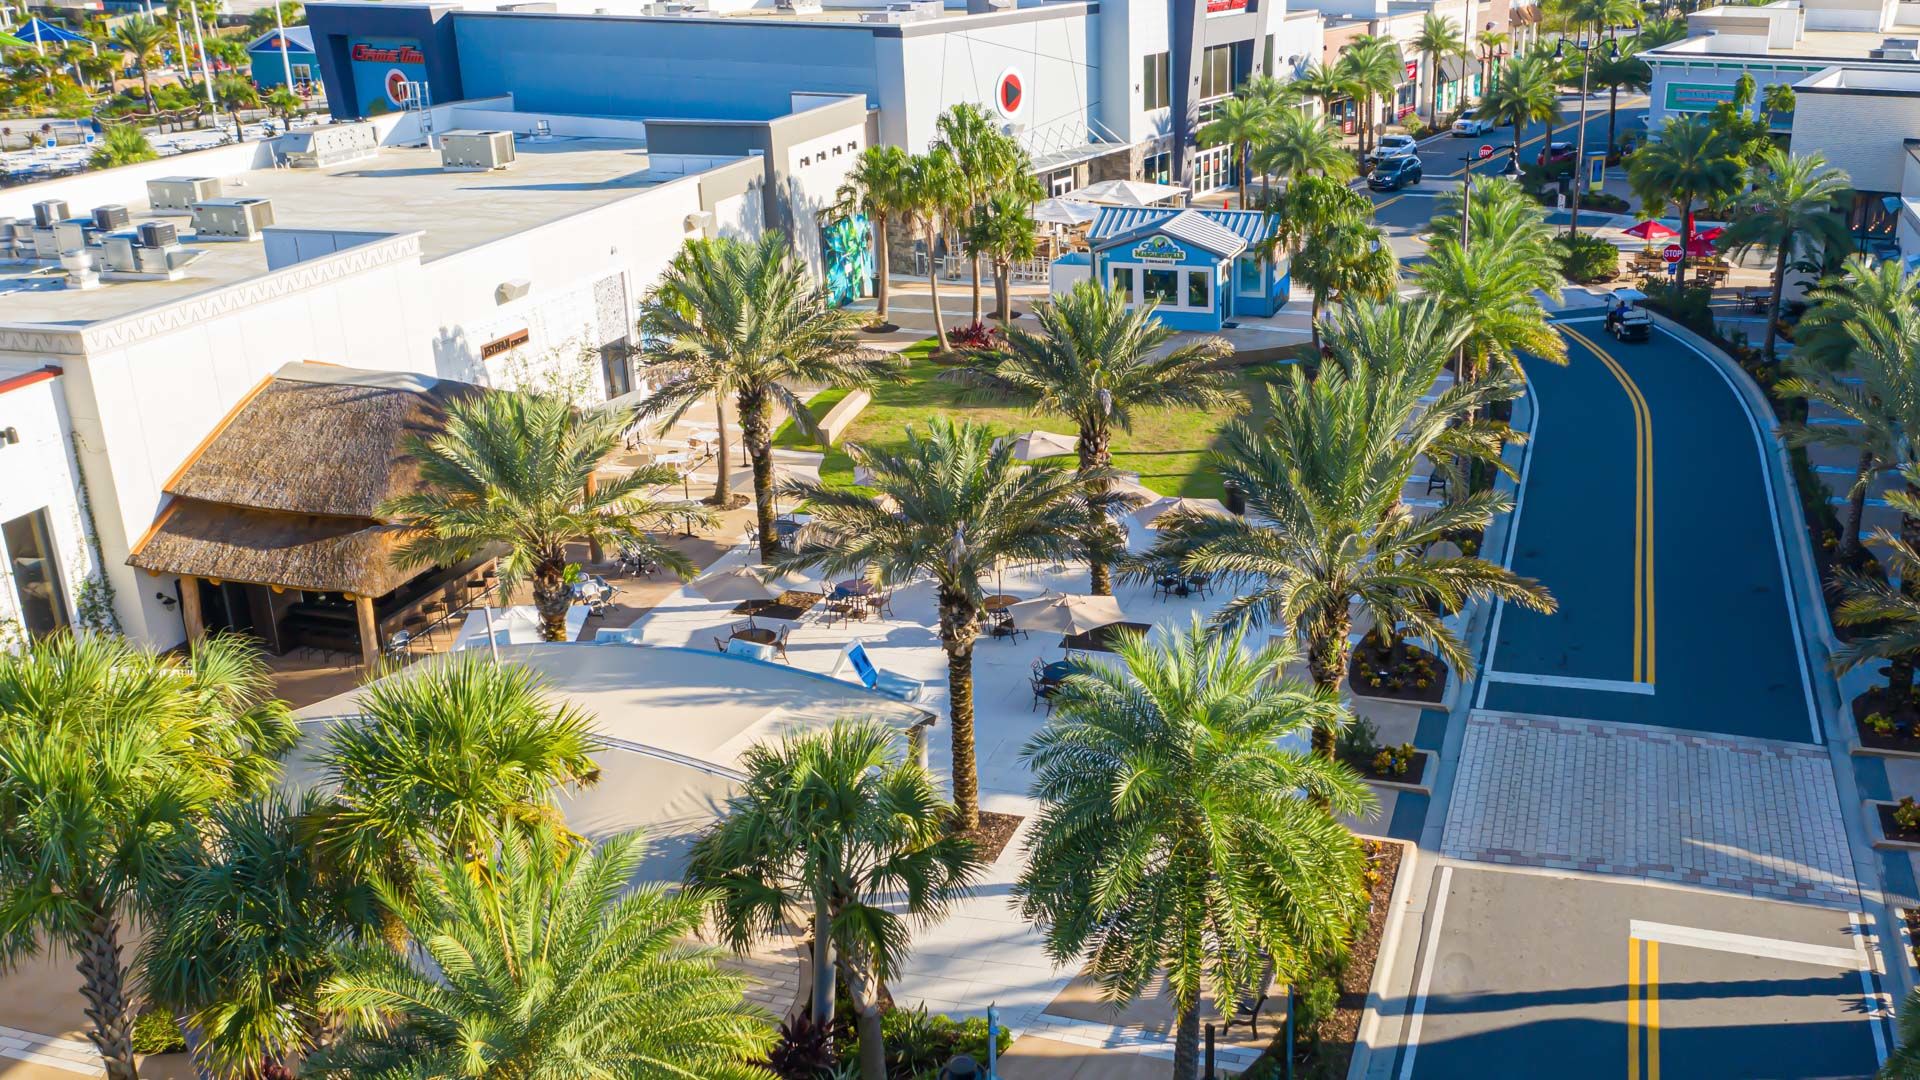 Aerial view of the Promenade Plaza Stage surrounded by Palm trees and storefronts.